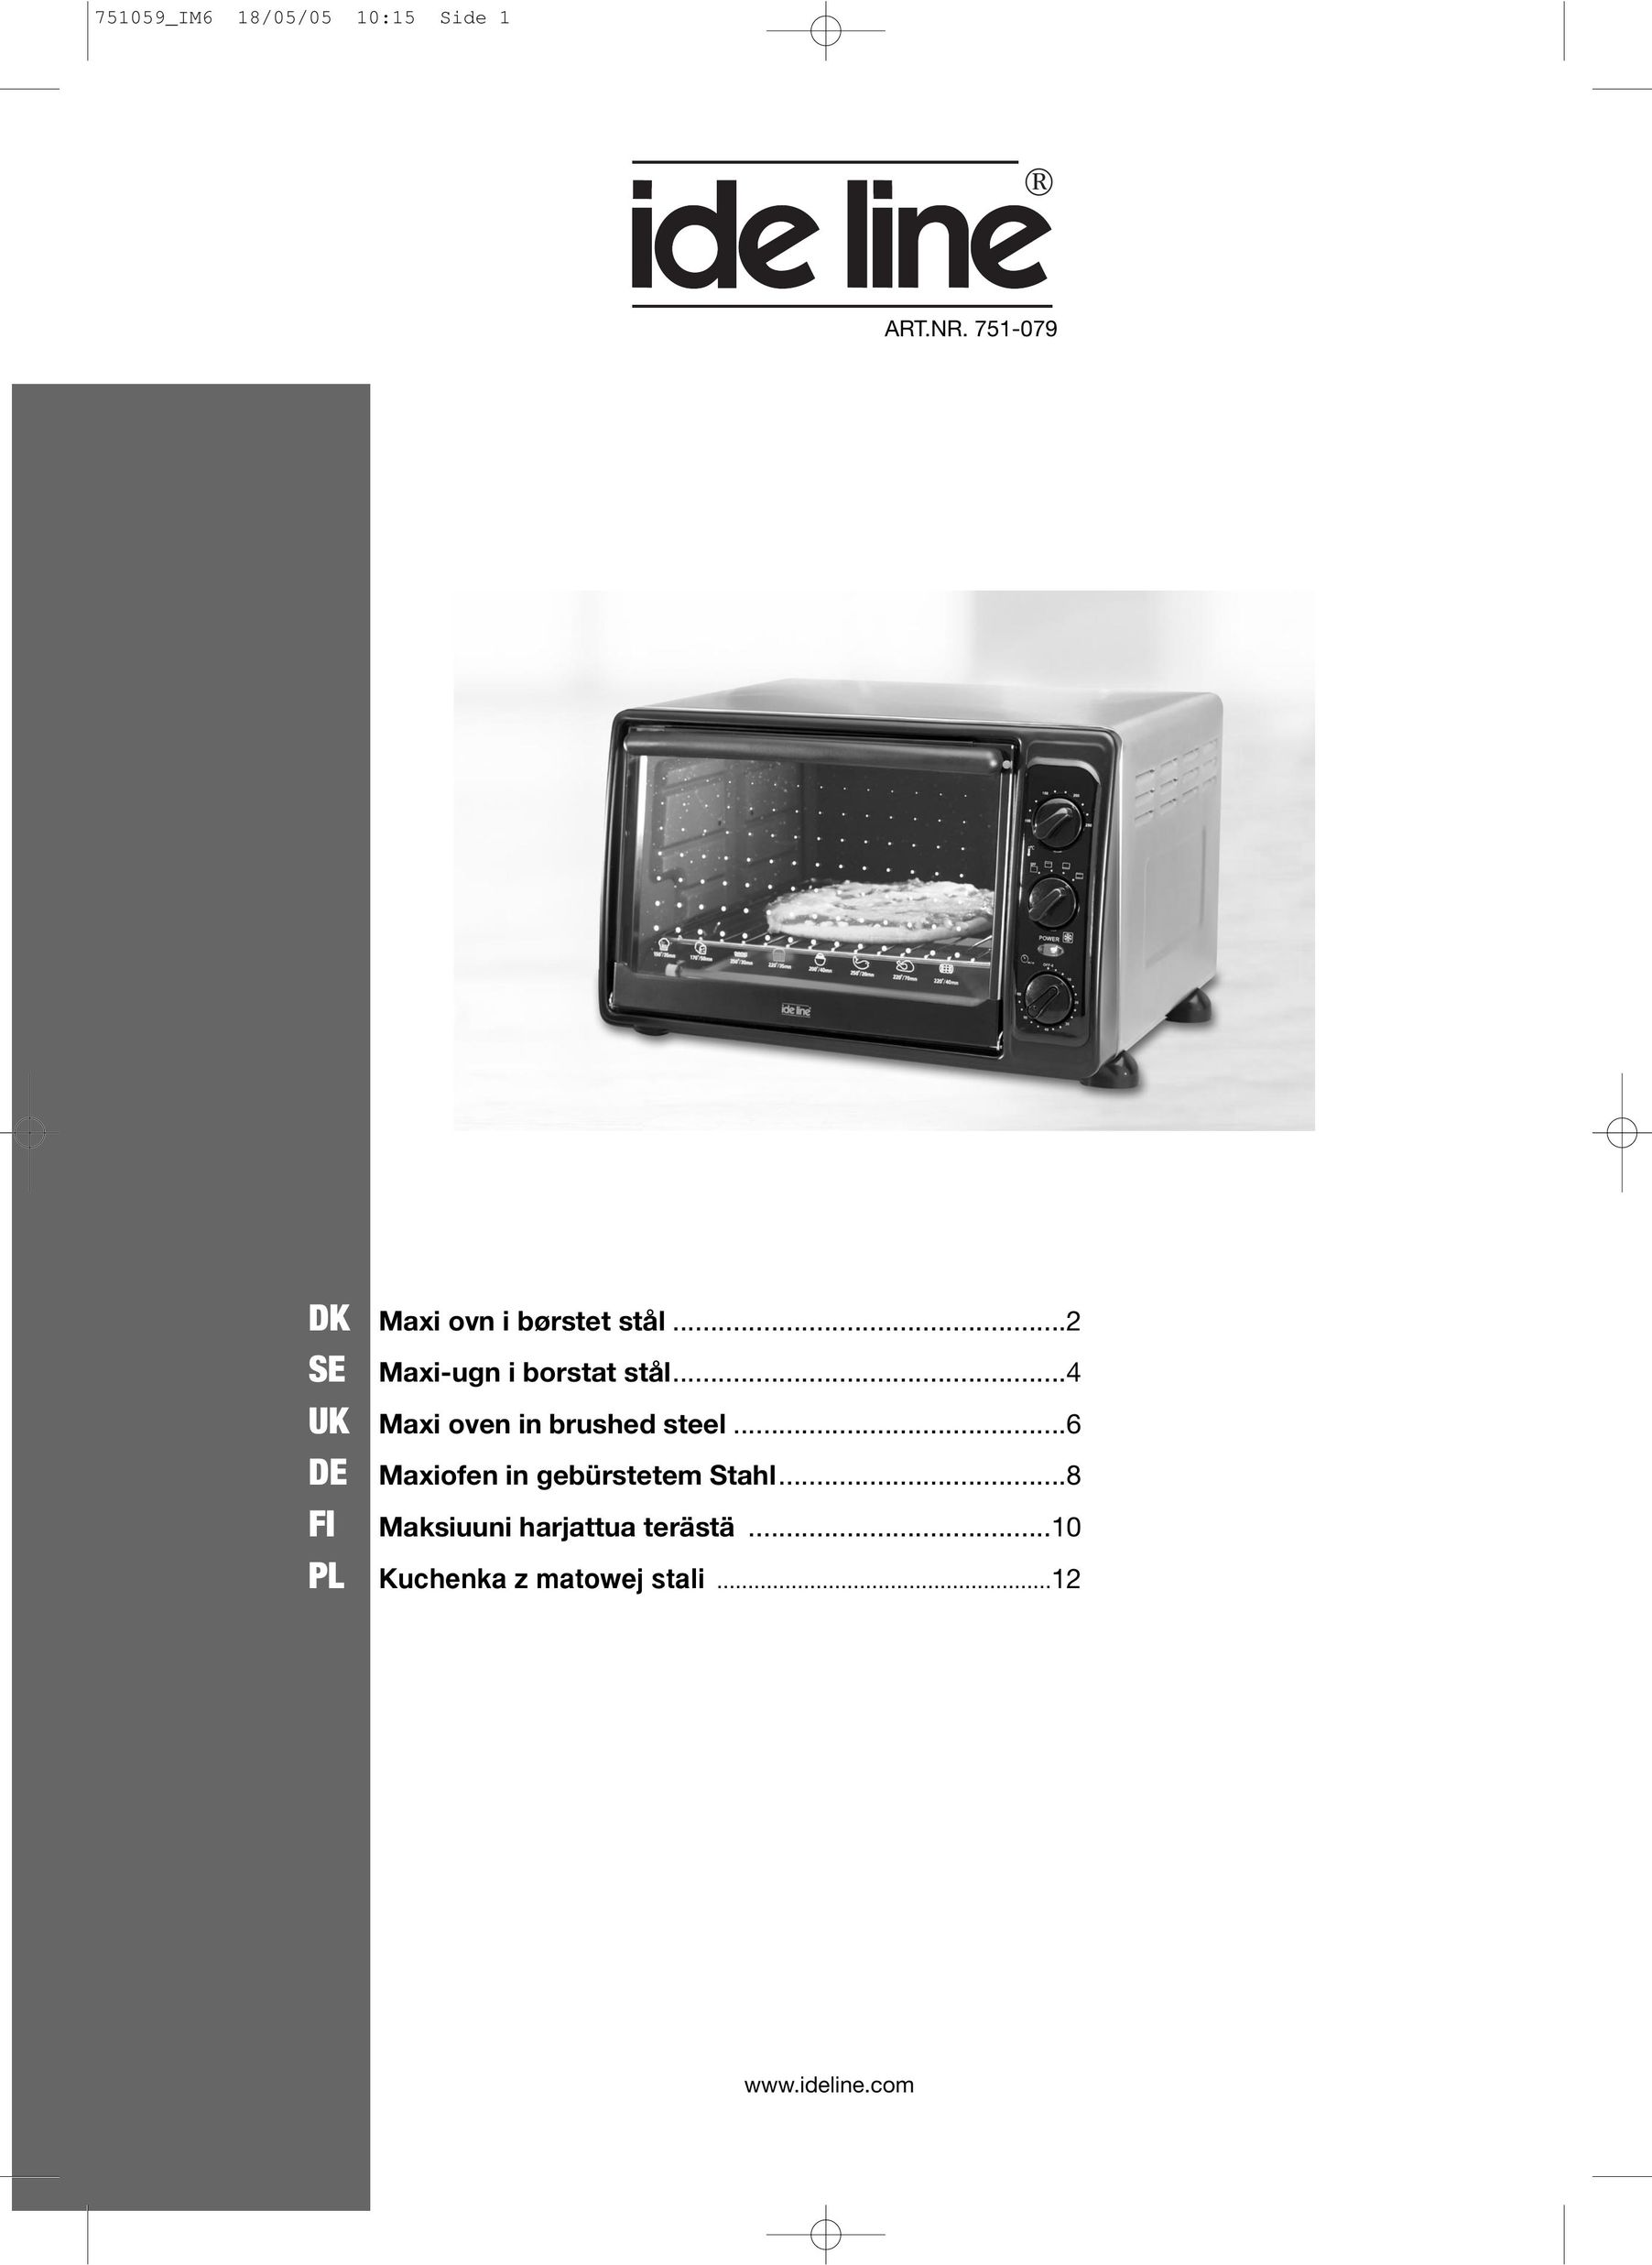 Ide Line 751-079 Microwave Oven User Manual